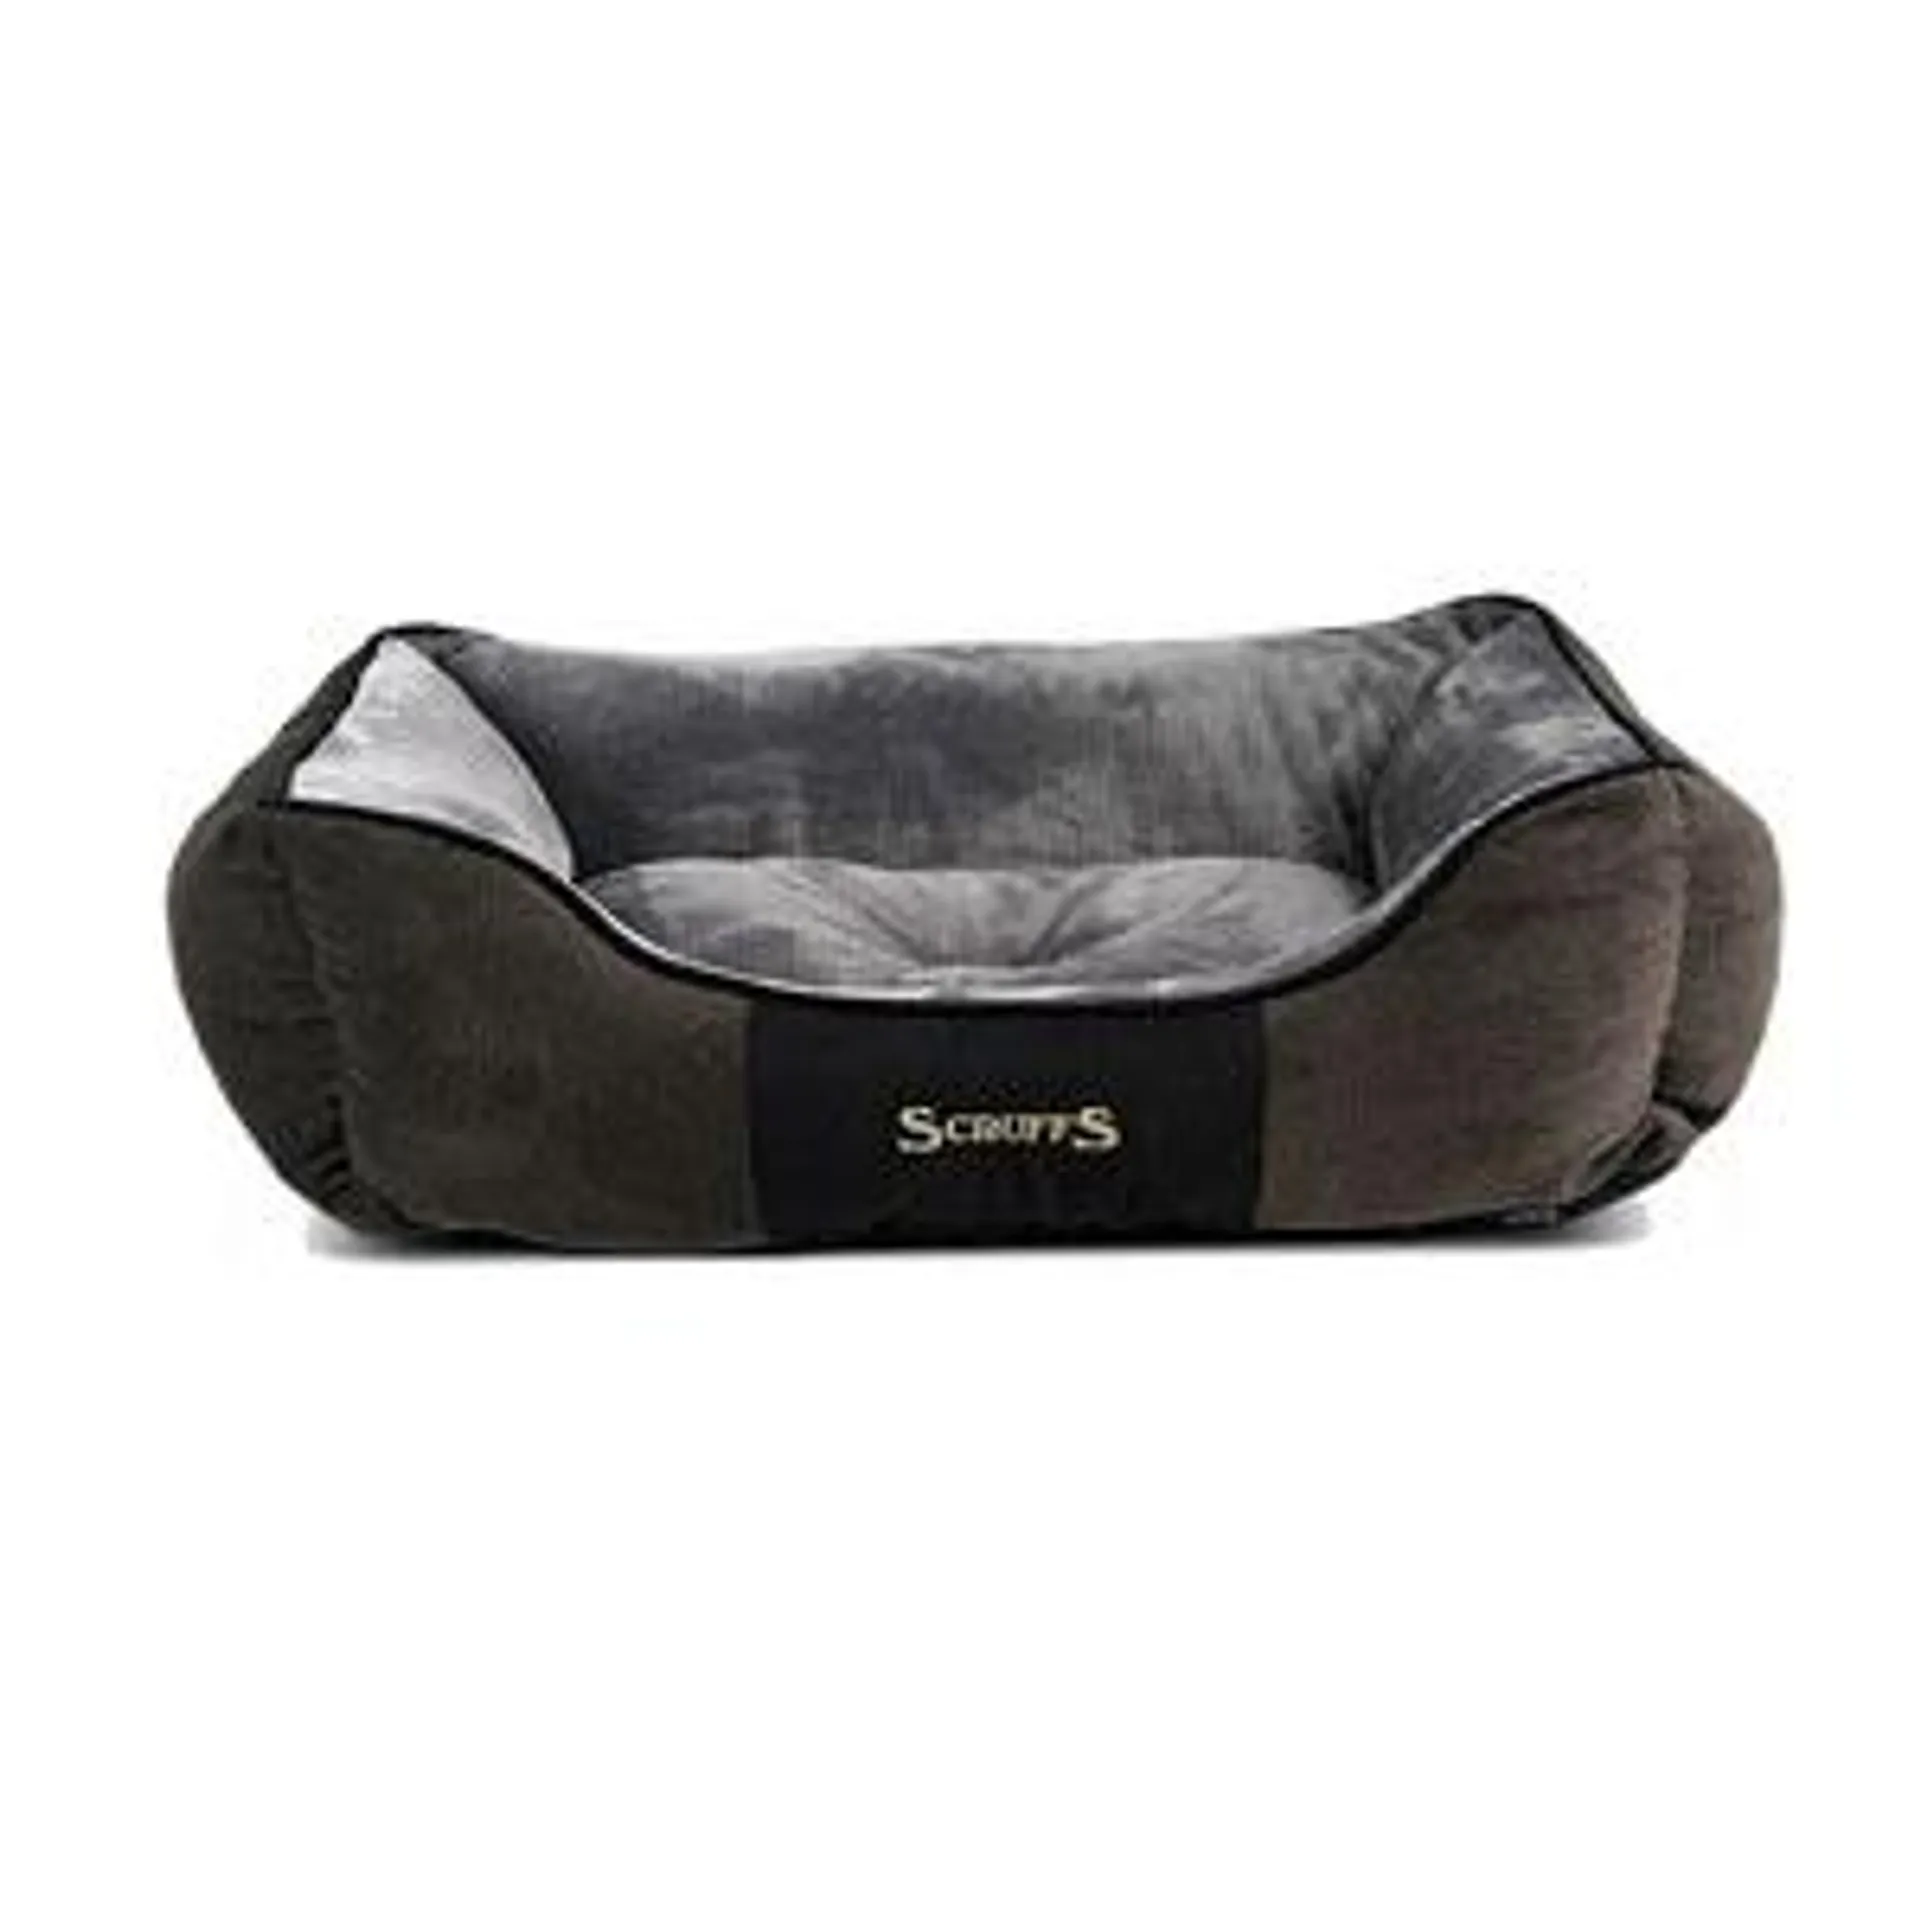 Scruffs Super Soft Luxurious Chester Dog Box Bed Large Graphite (Web Exclusive)